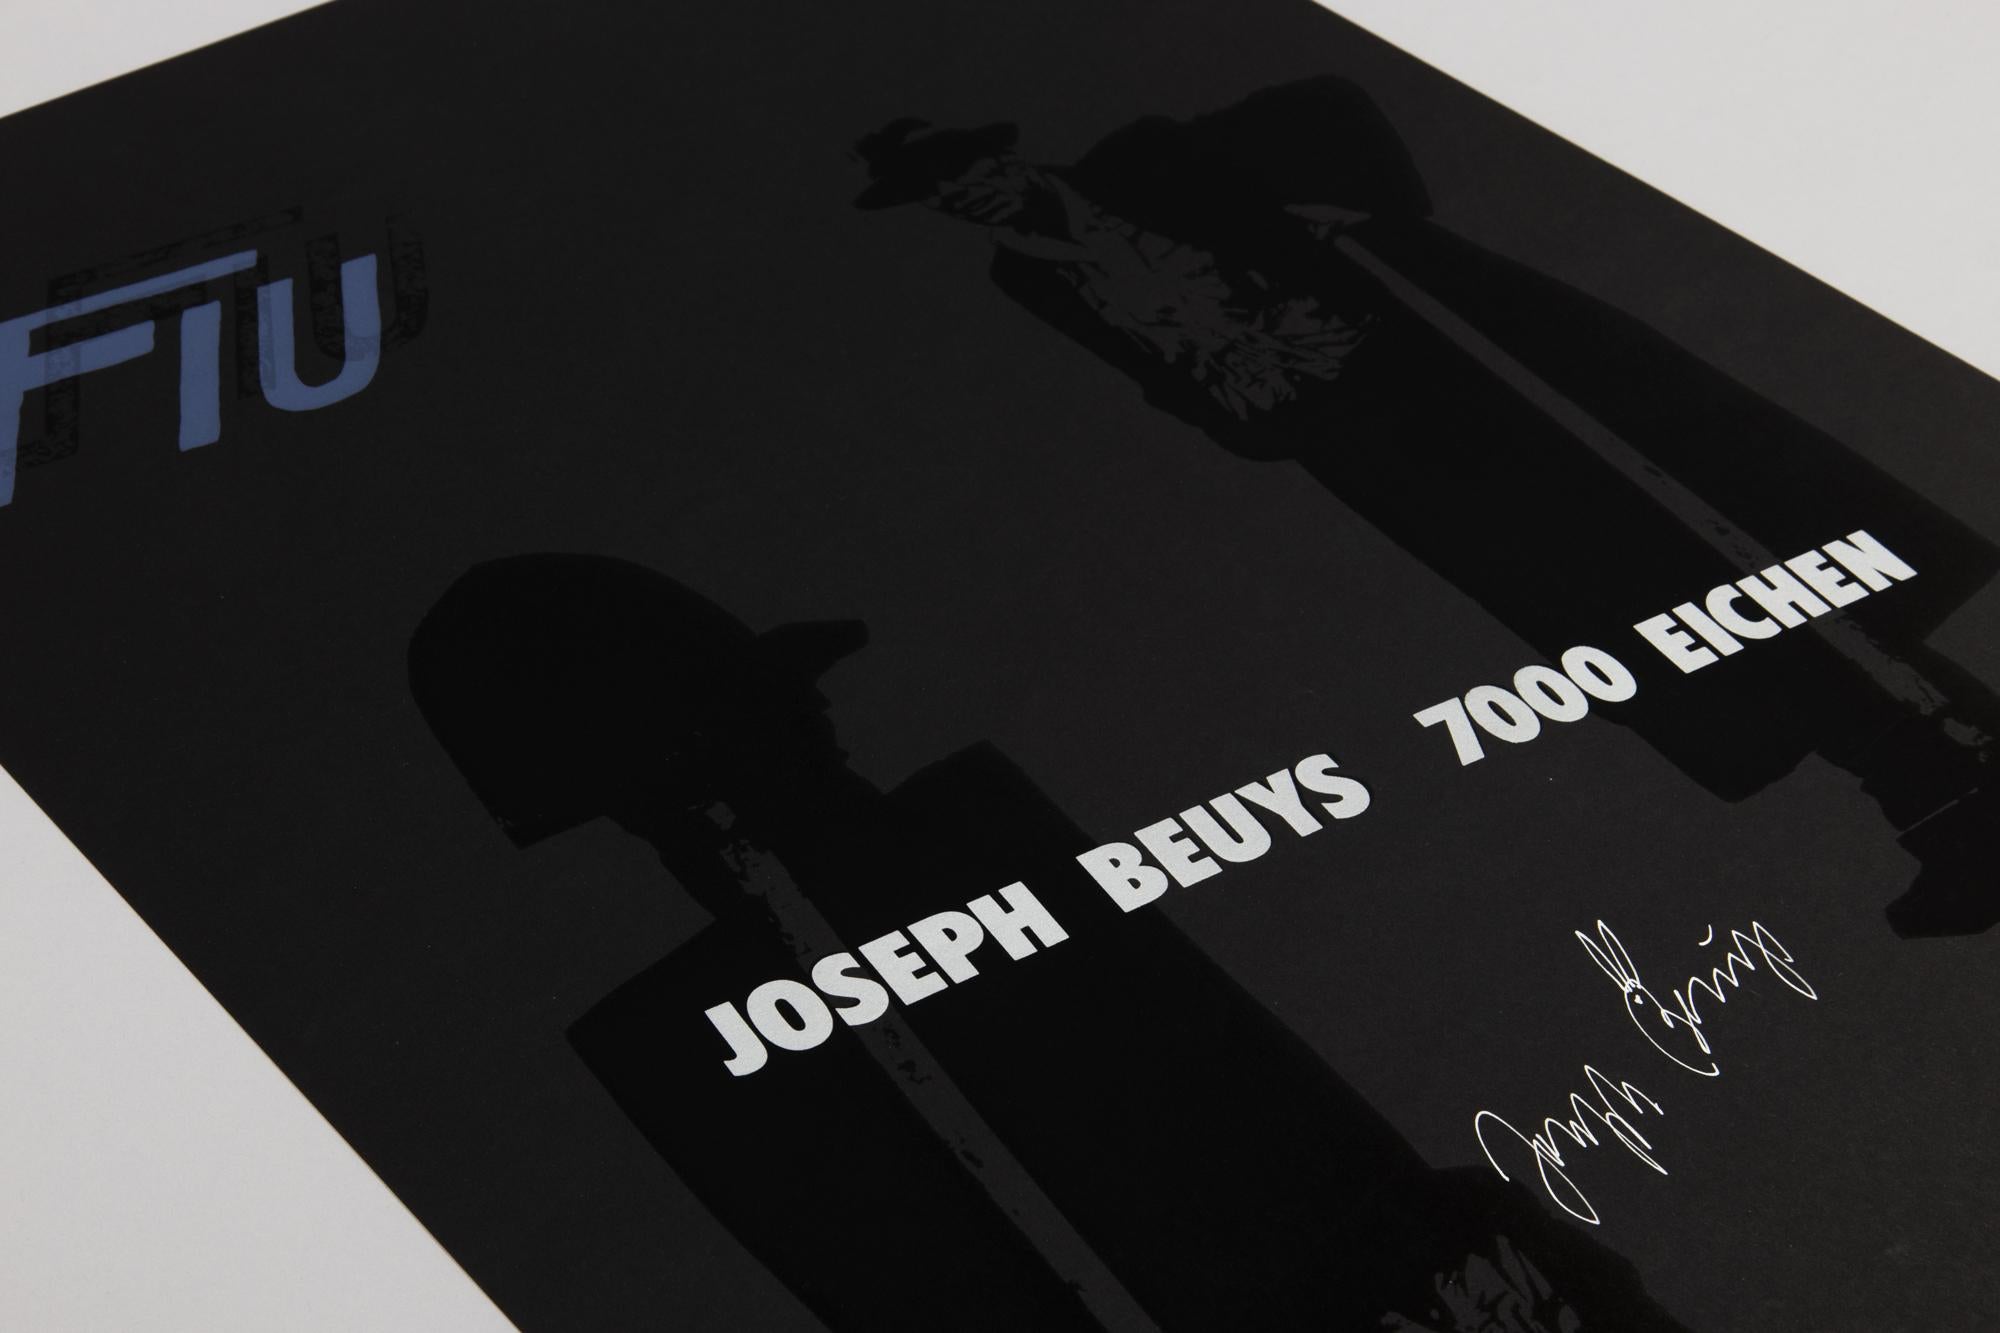 Joseph Beuys (German, 1921-1986)
FIU Joseph Beuys, 7000 Eichen, 1982
Medium: Screenprint on black card stock
Dimensions: 61.5 x 45.8 cm
Edition of 100: Hand-signed in silver
Condition: Excellent